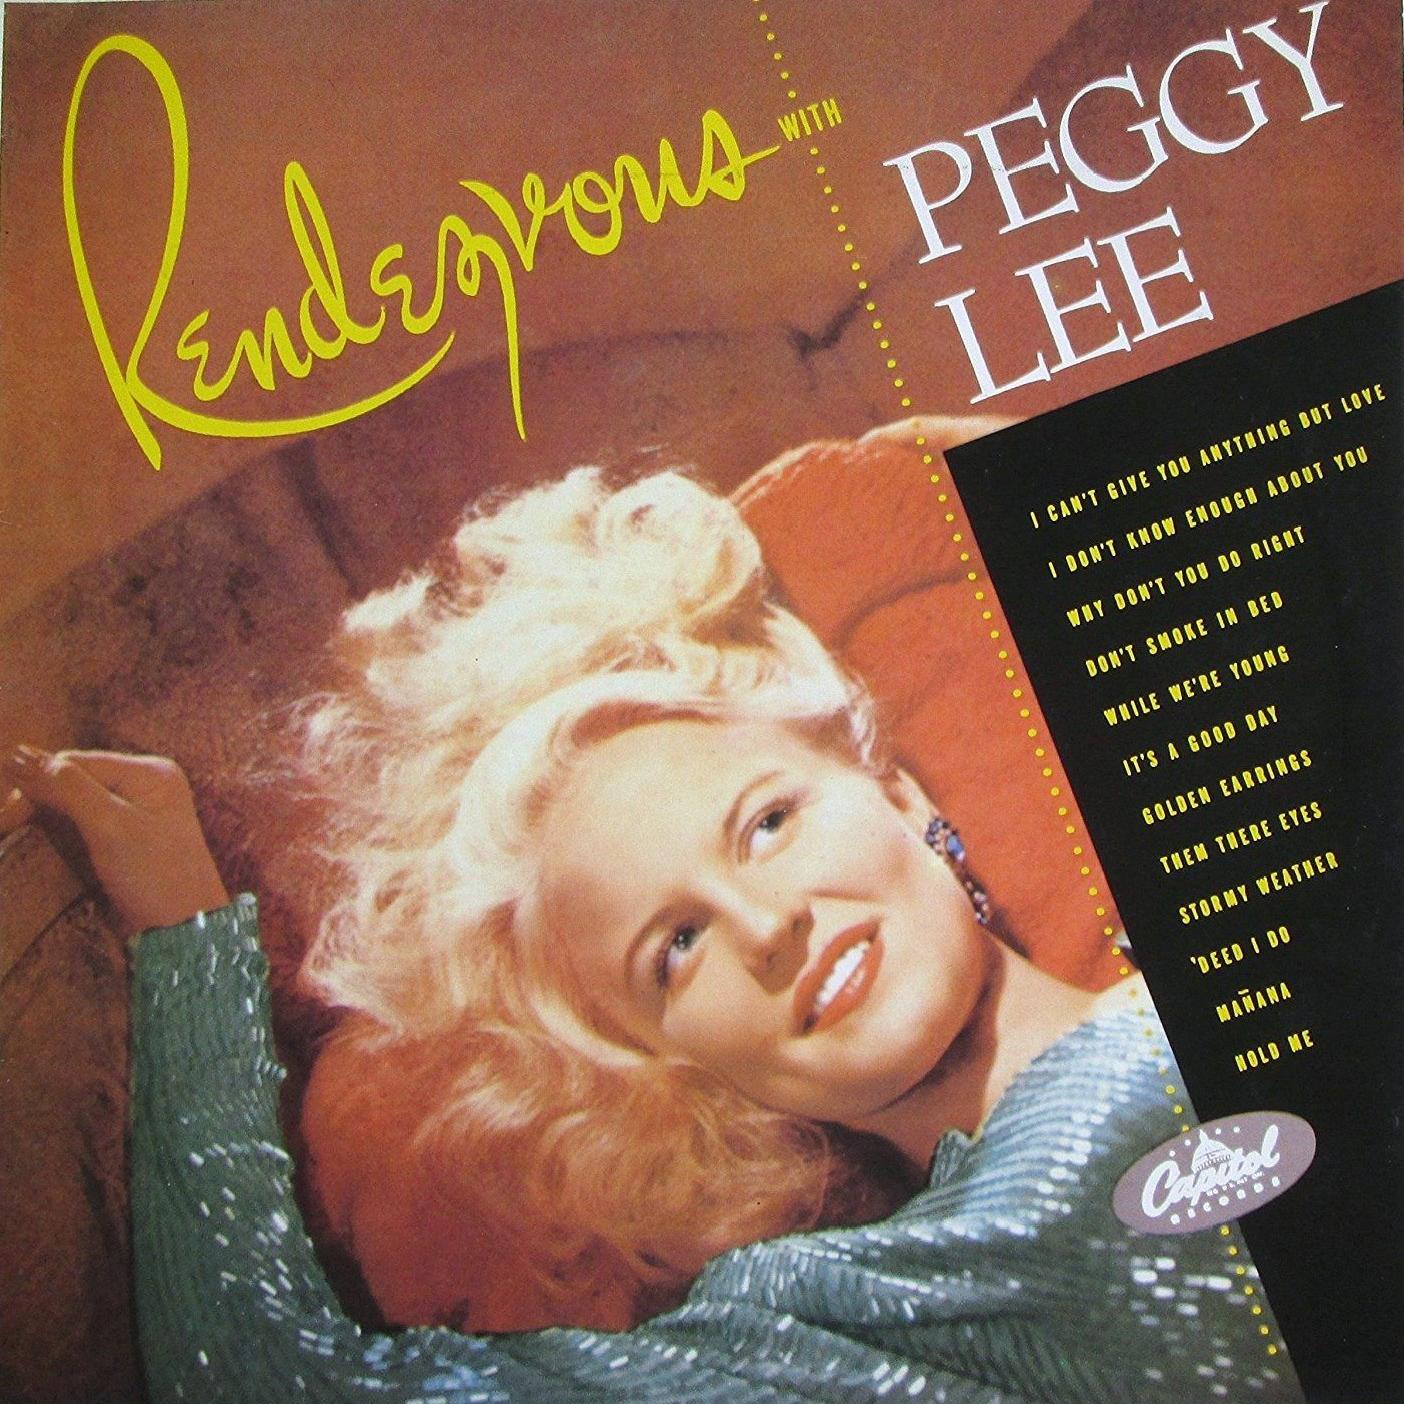 Peggy Lee - Rendezvous With Peggy Lee (1948)